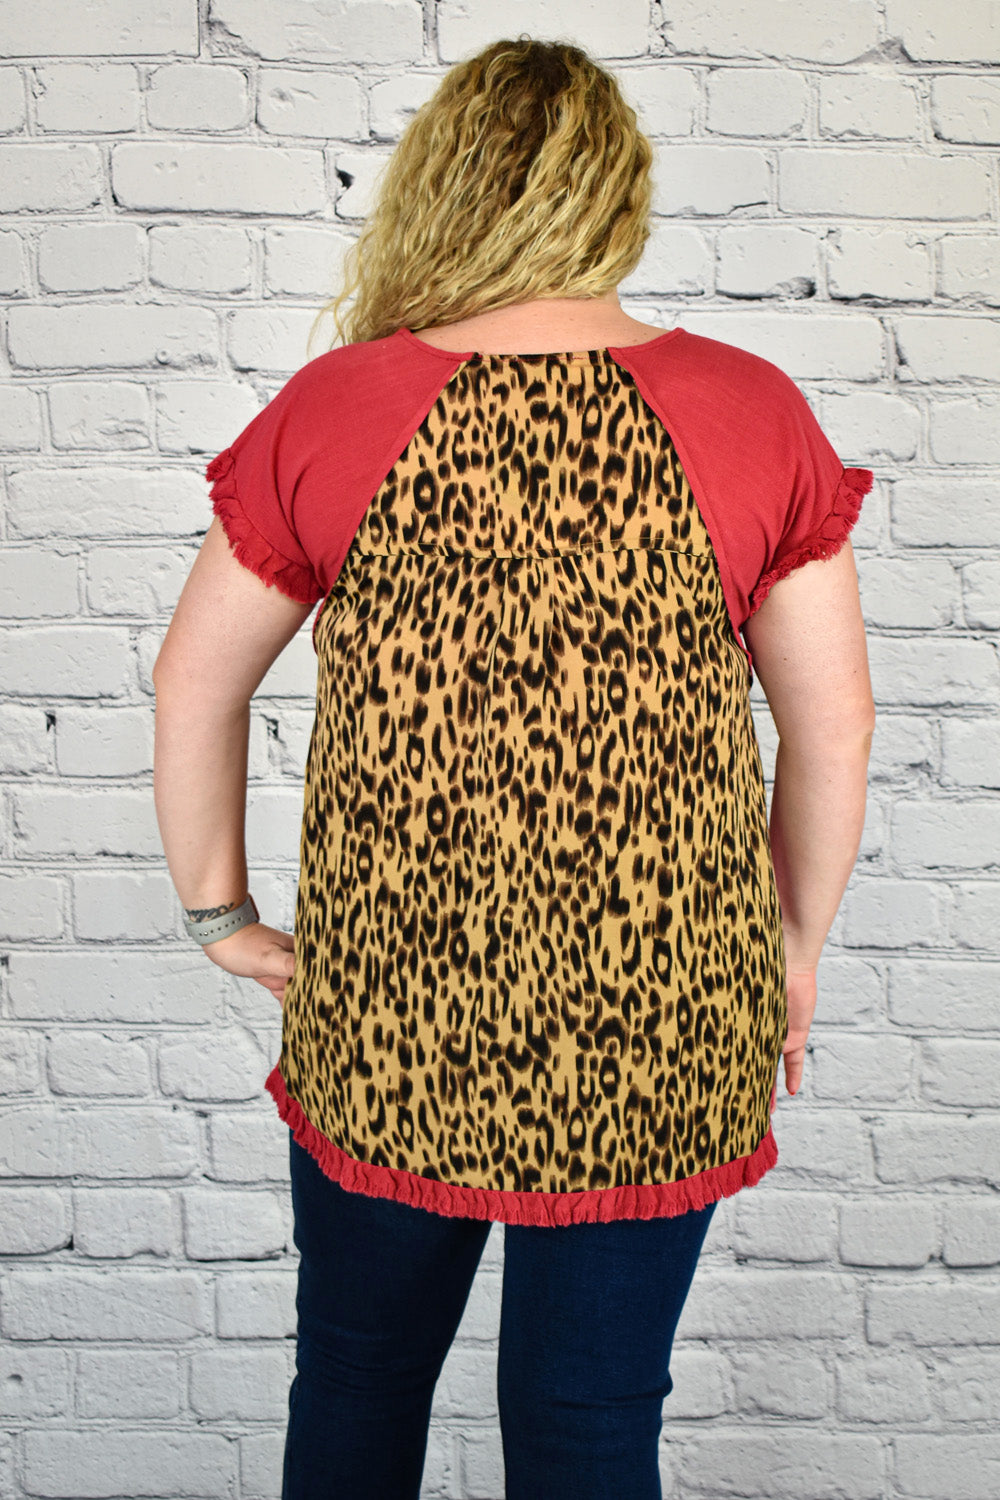 Linen Leopard Print Tunic Top In Plus Size by Umgee Clothing